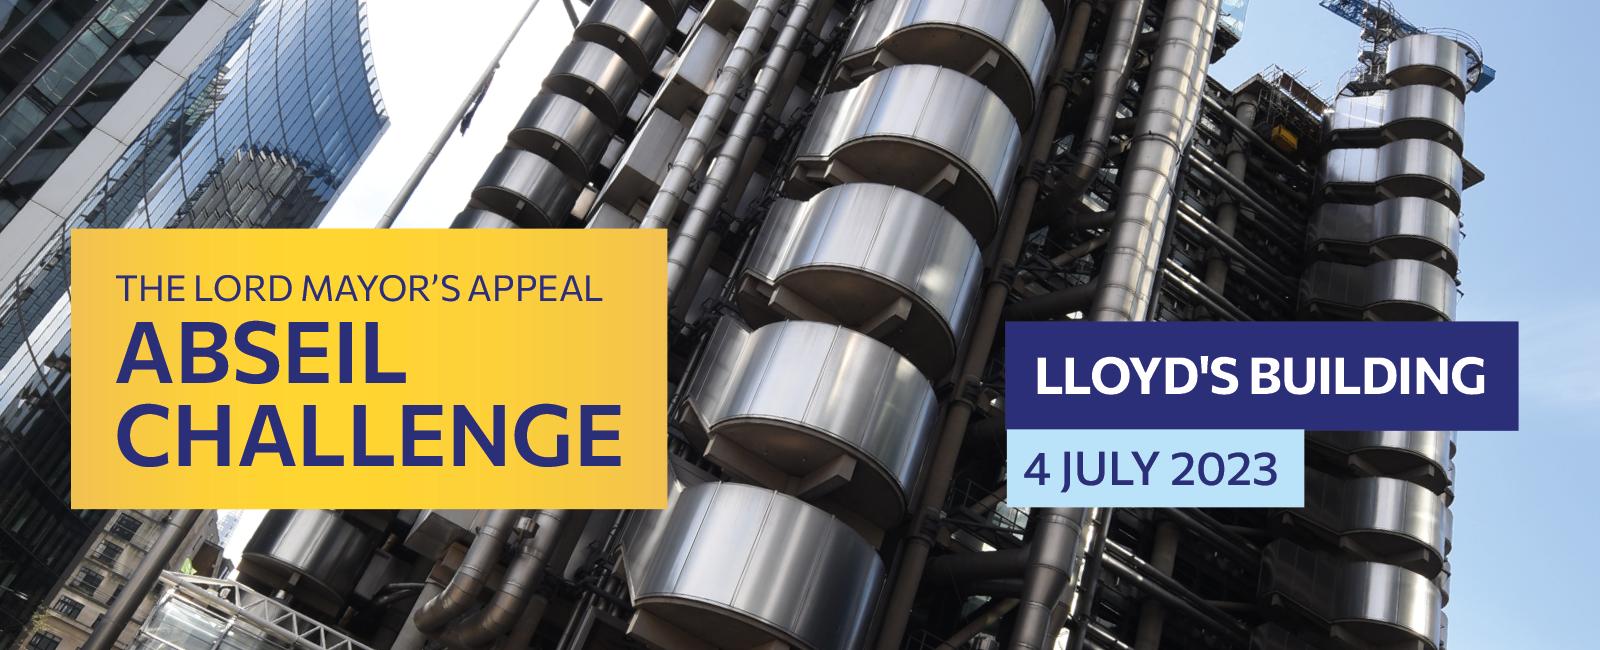 Lord Mayors Appeal abseil challenge July 2023